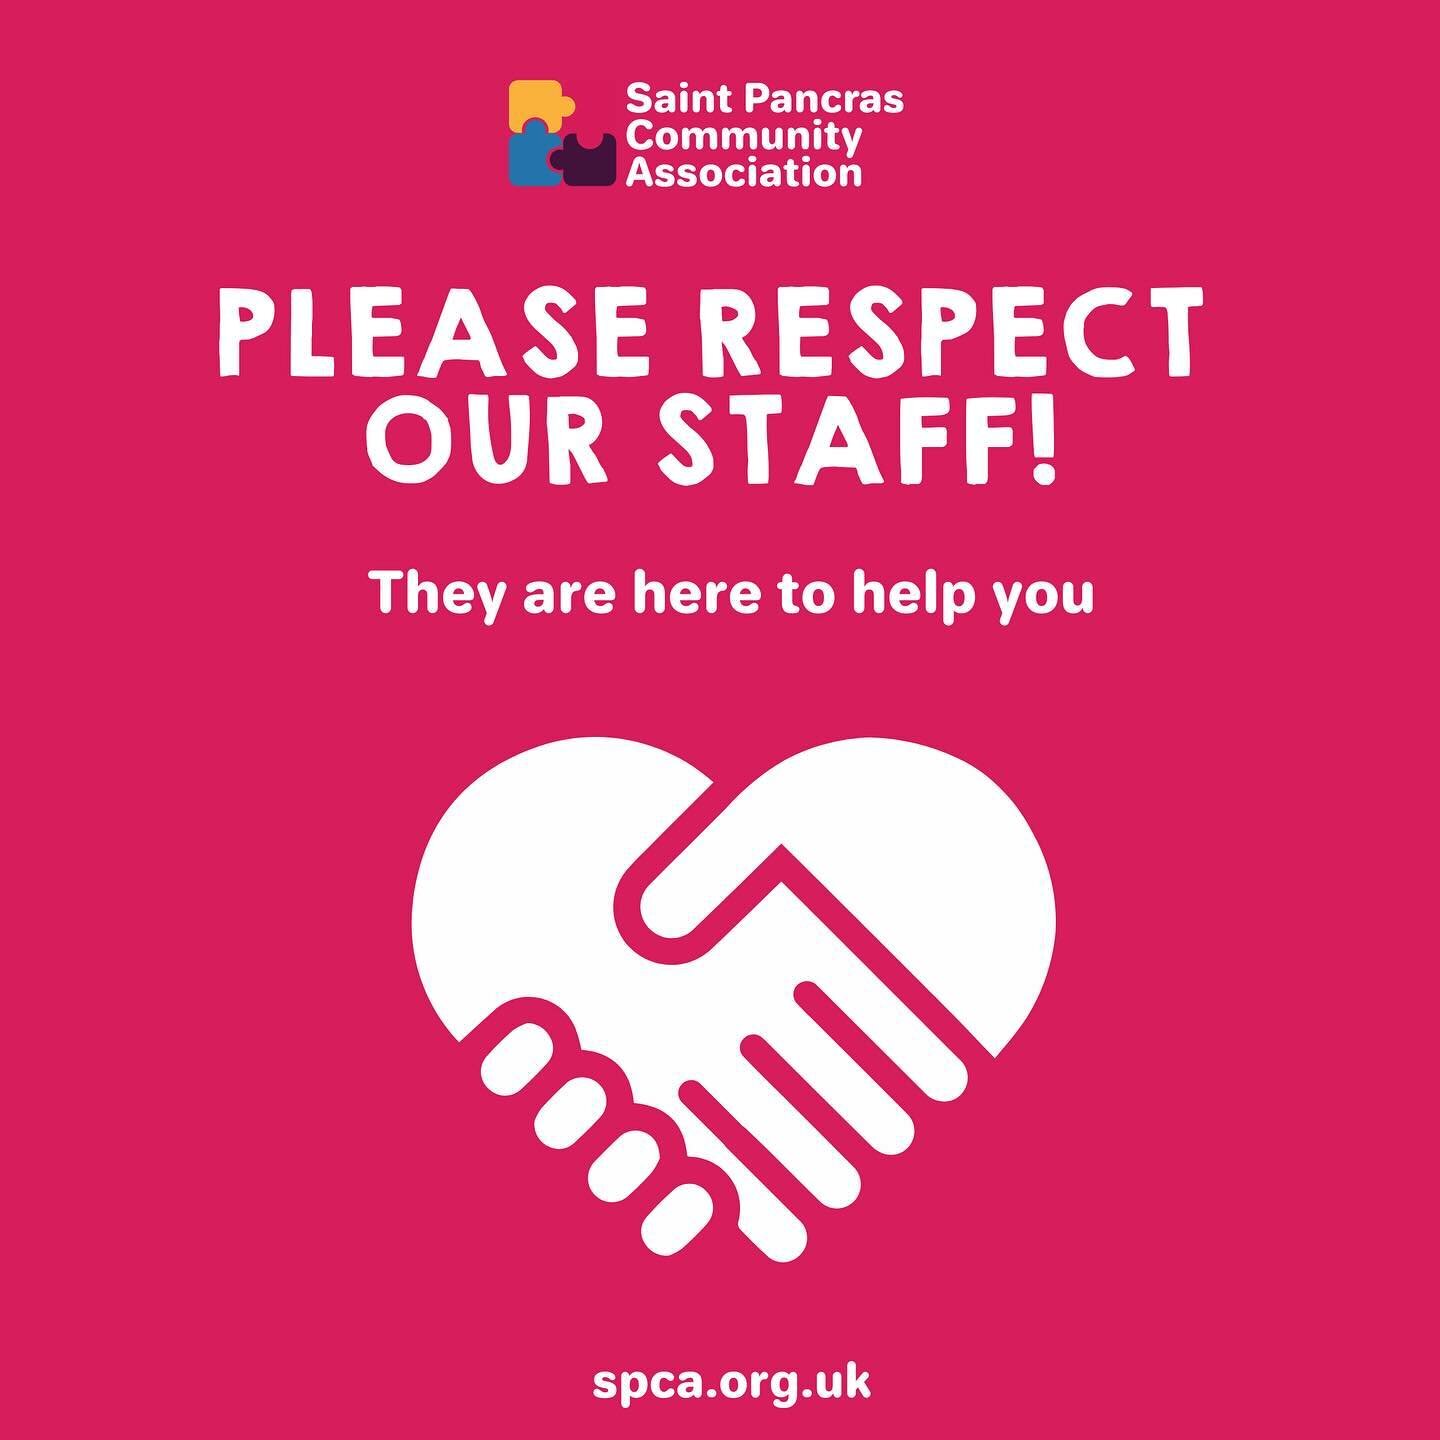 Respect our staff and our community! We have a strict zero-tolerance policy towards the harassment of our dedicated team members. 

Anyone found harassing our staff will be prohibited from entering the centre. Let&rsquo;s create a safe and inclusive 